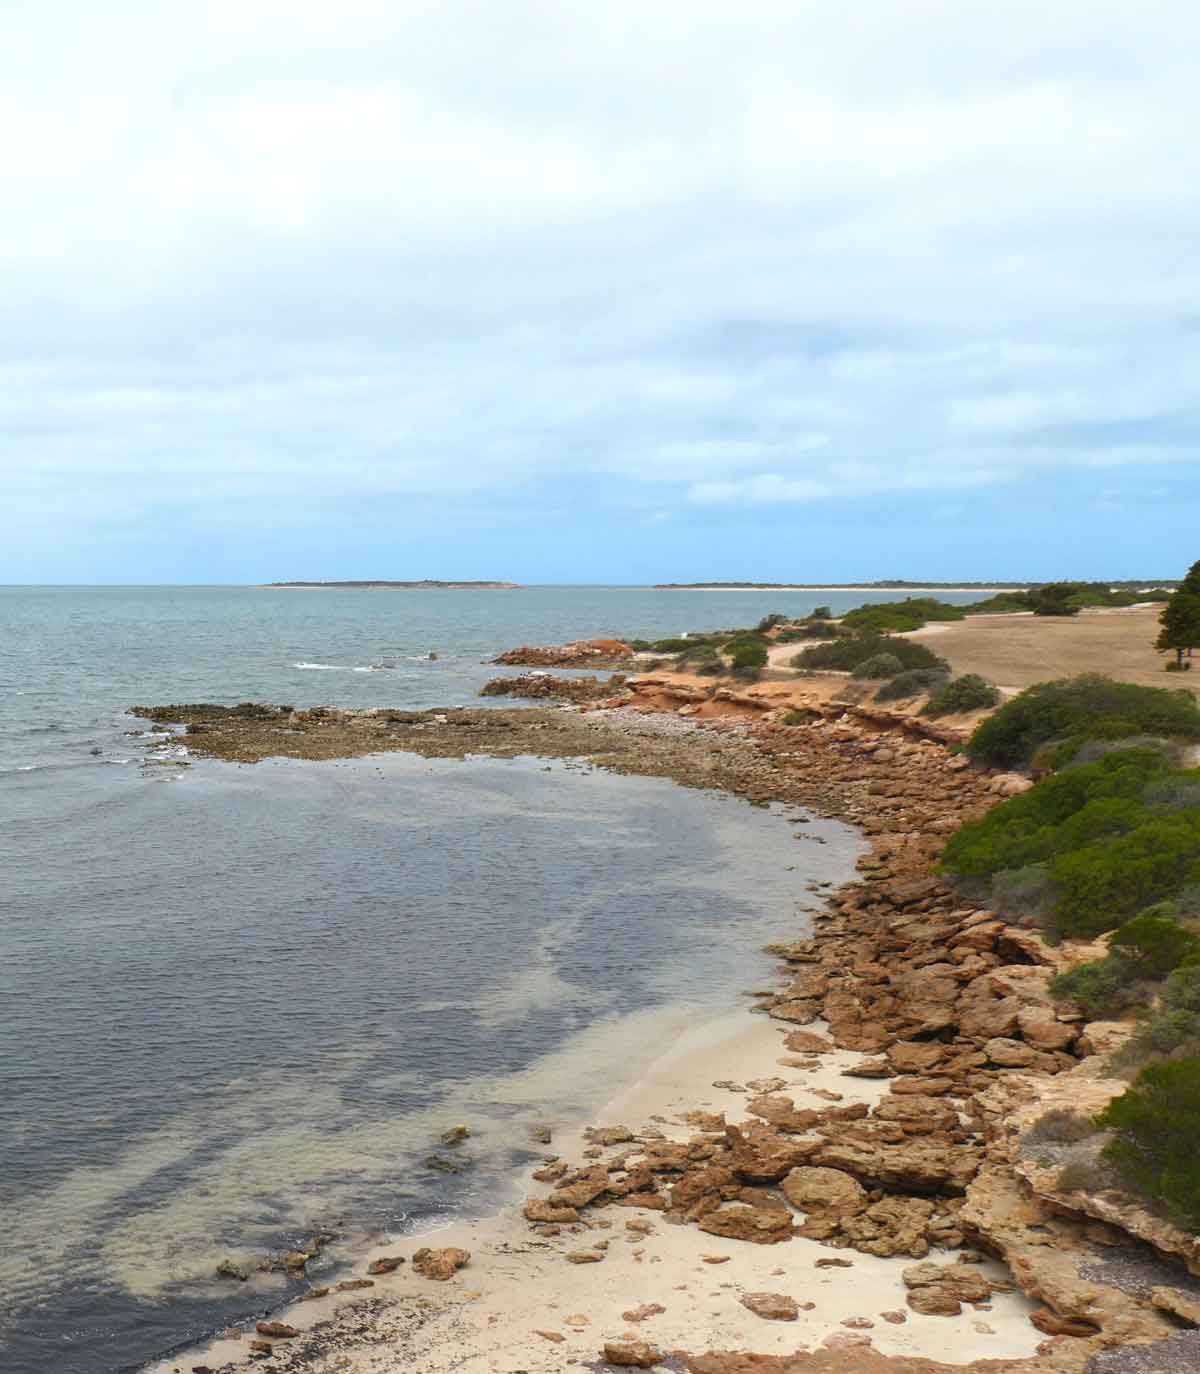 Coastline view from Island Lookout Tower, shows coastal looped trail. Located in Tumby Bay, Eyre Peninsula, South Australia.